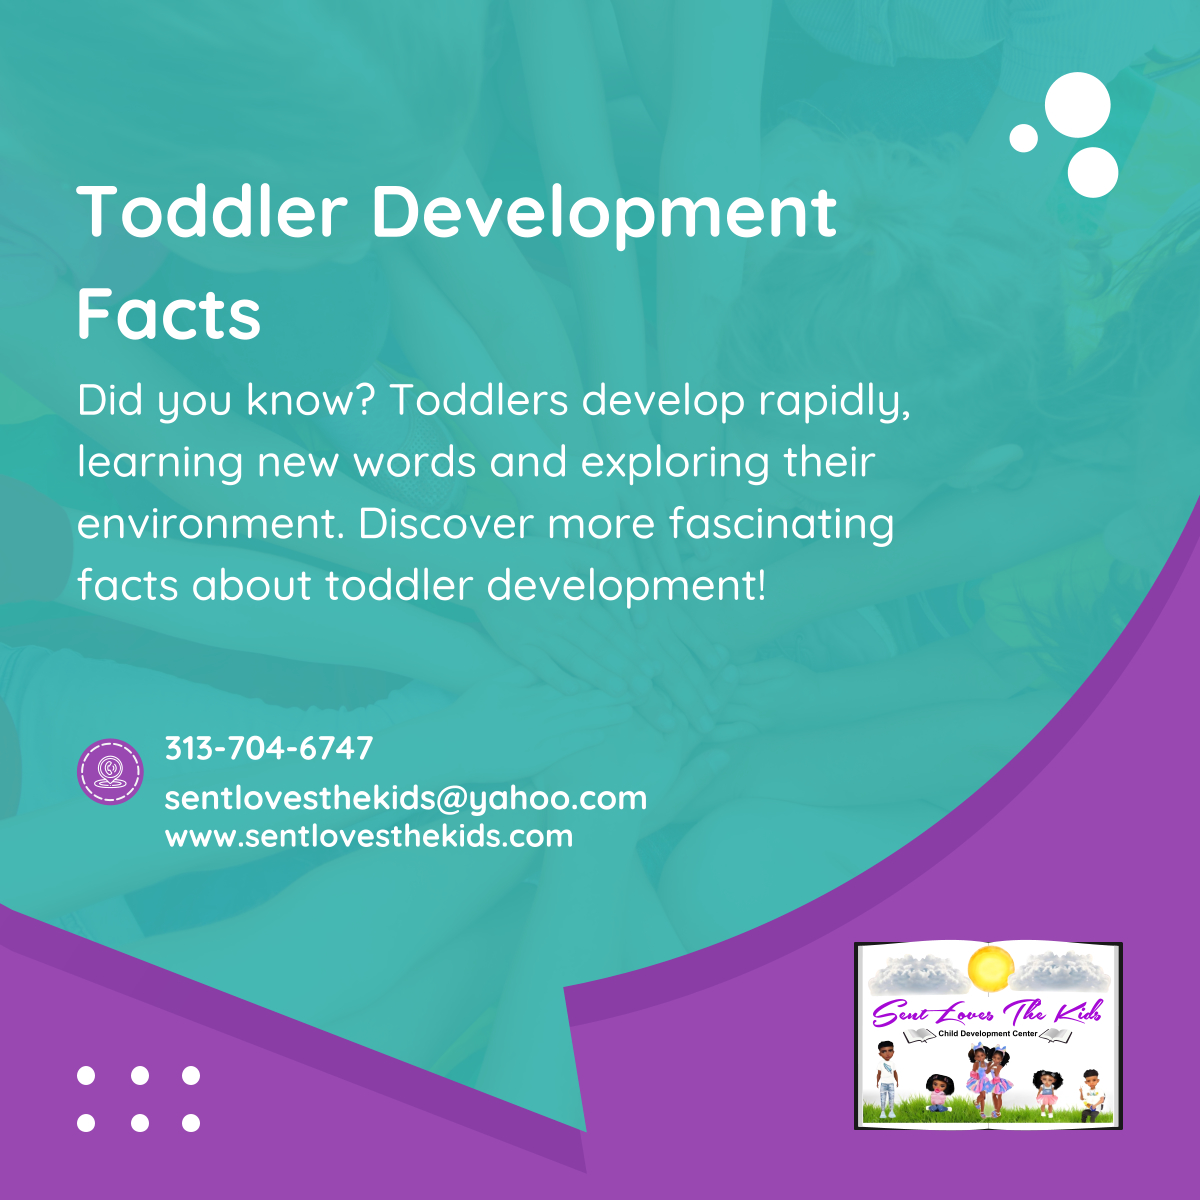 Dive into the world of toddler development! Each discovery is a step towards understanding and supporting your child's growth. 

#DetroitMI #ChildCare #ToddlerDevelopment